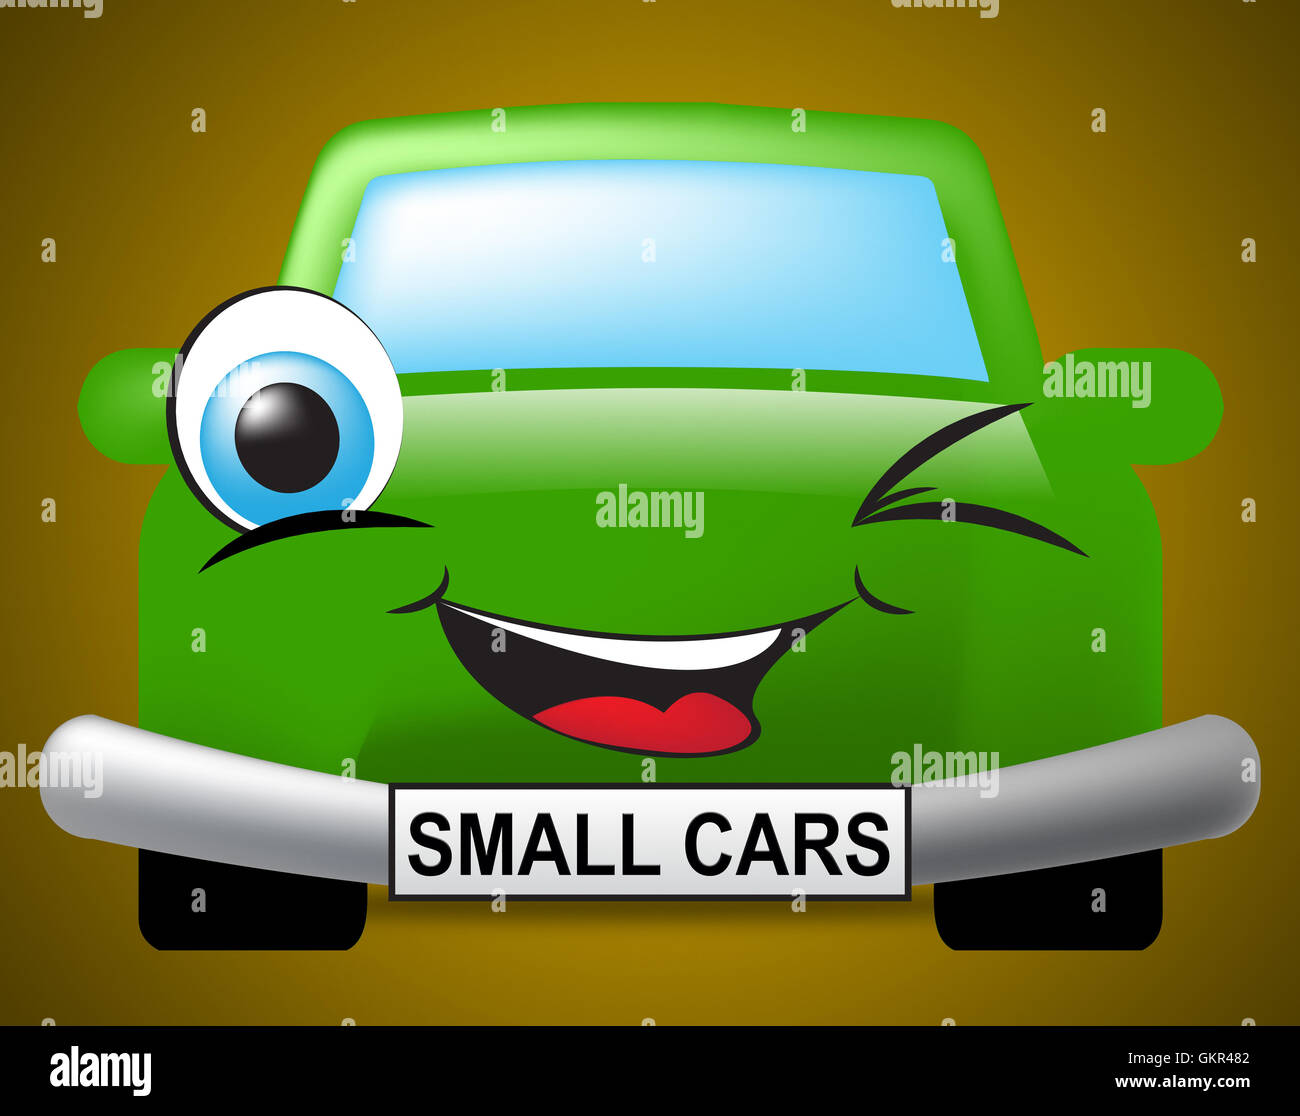 Small Cars Showing Compact Automobile Or Vehicle Stock Photo